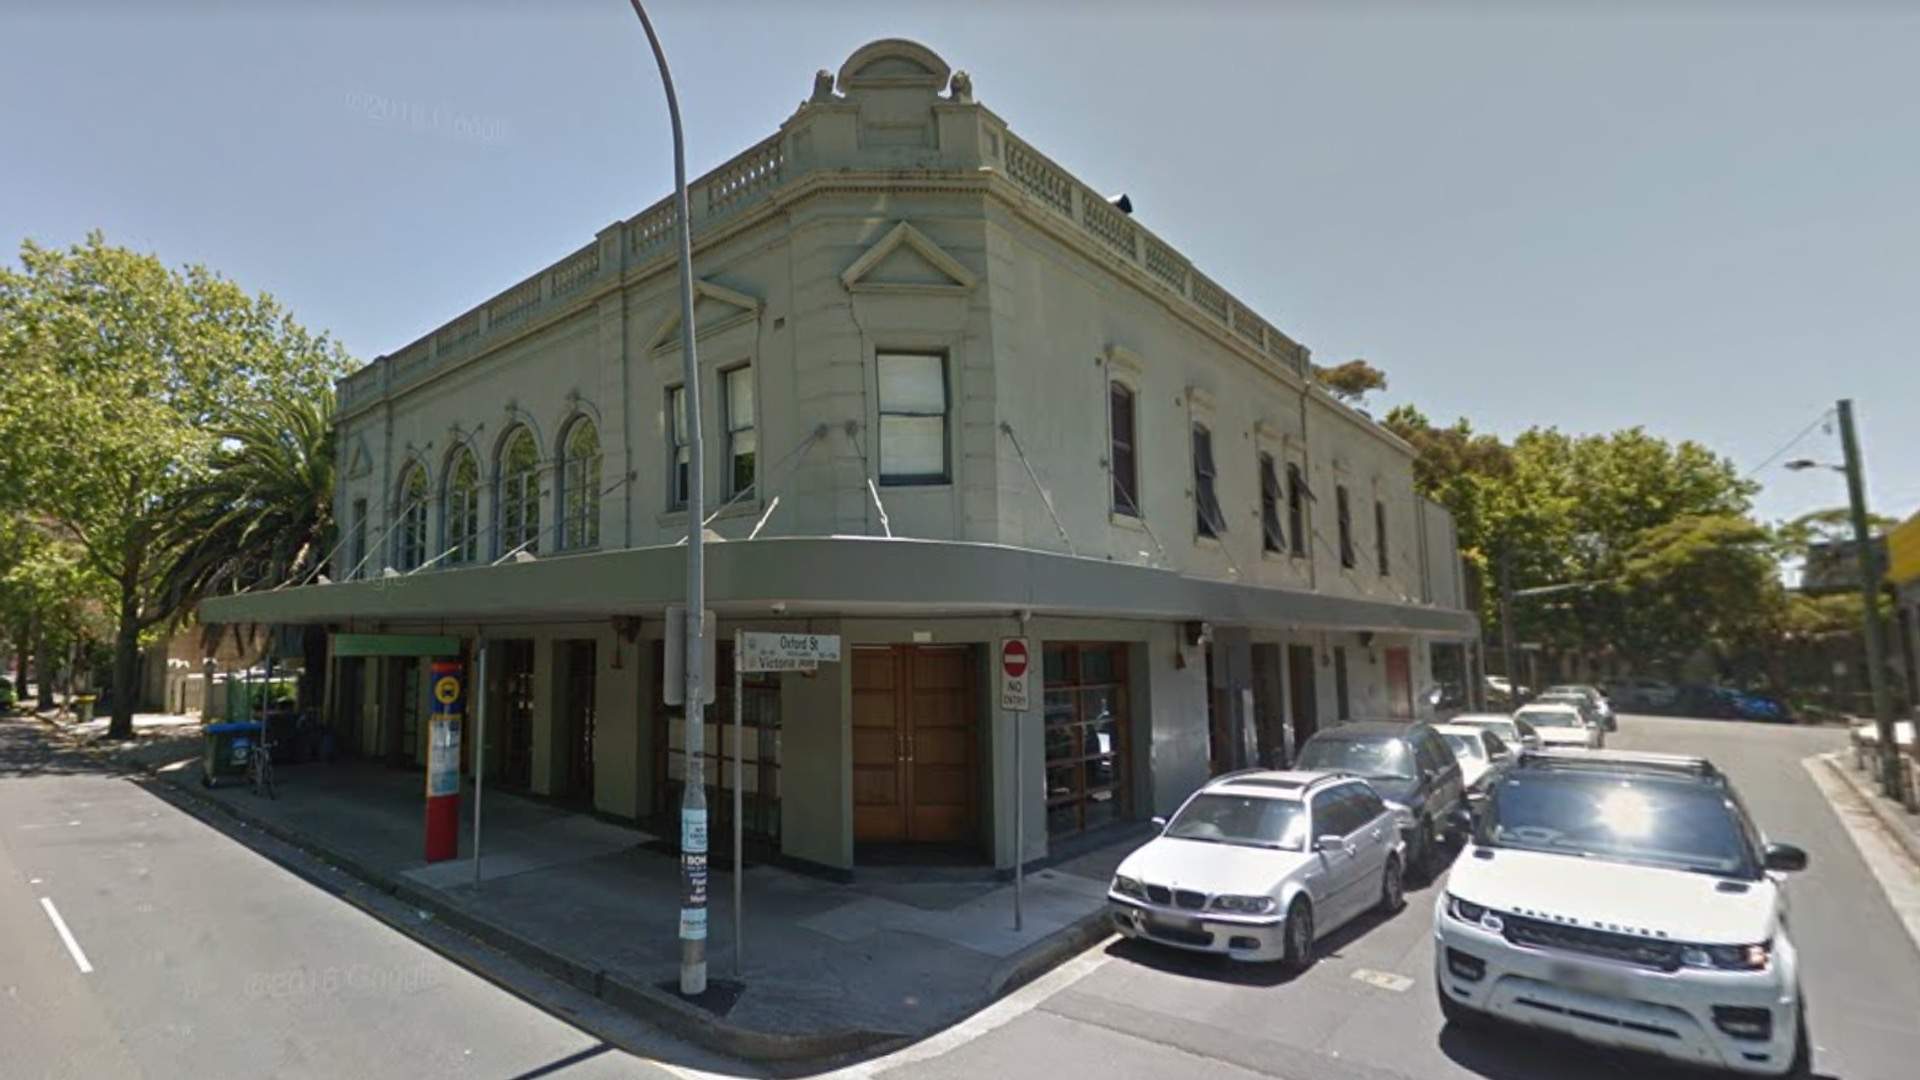 Merivale Continues to Eat Up Sydney's Pub Market, Acquires Woollahra's Hotel Centennial